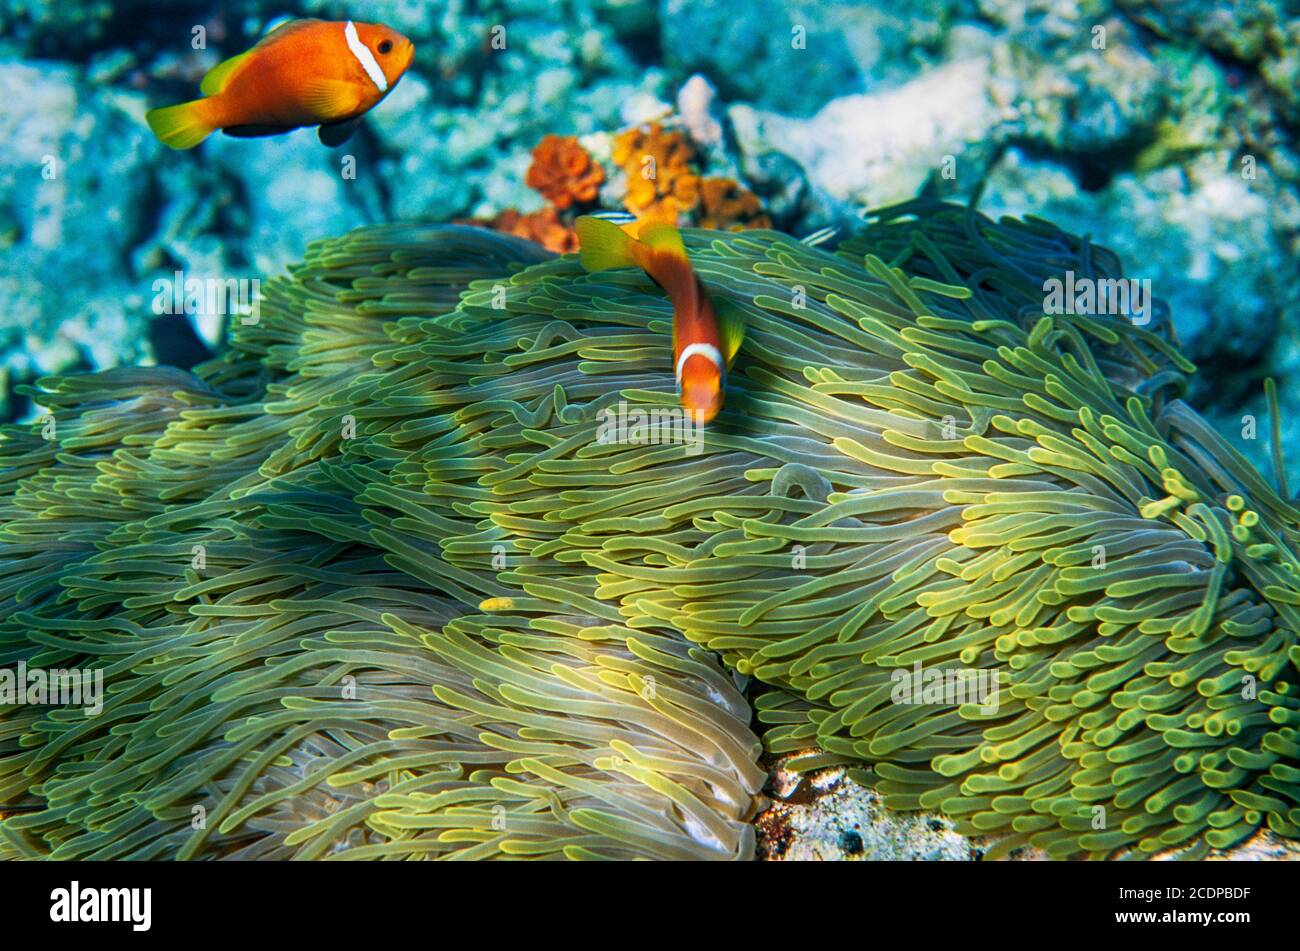 Amphiprion nigripes, Maldivian Clownfish and host anemone, Maldives. Archive image 2003. High resolution scan from transparency, August 2020. Credit: Malcolm Park/Alamy. Stock Photo